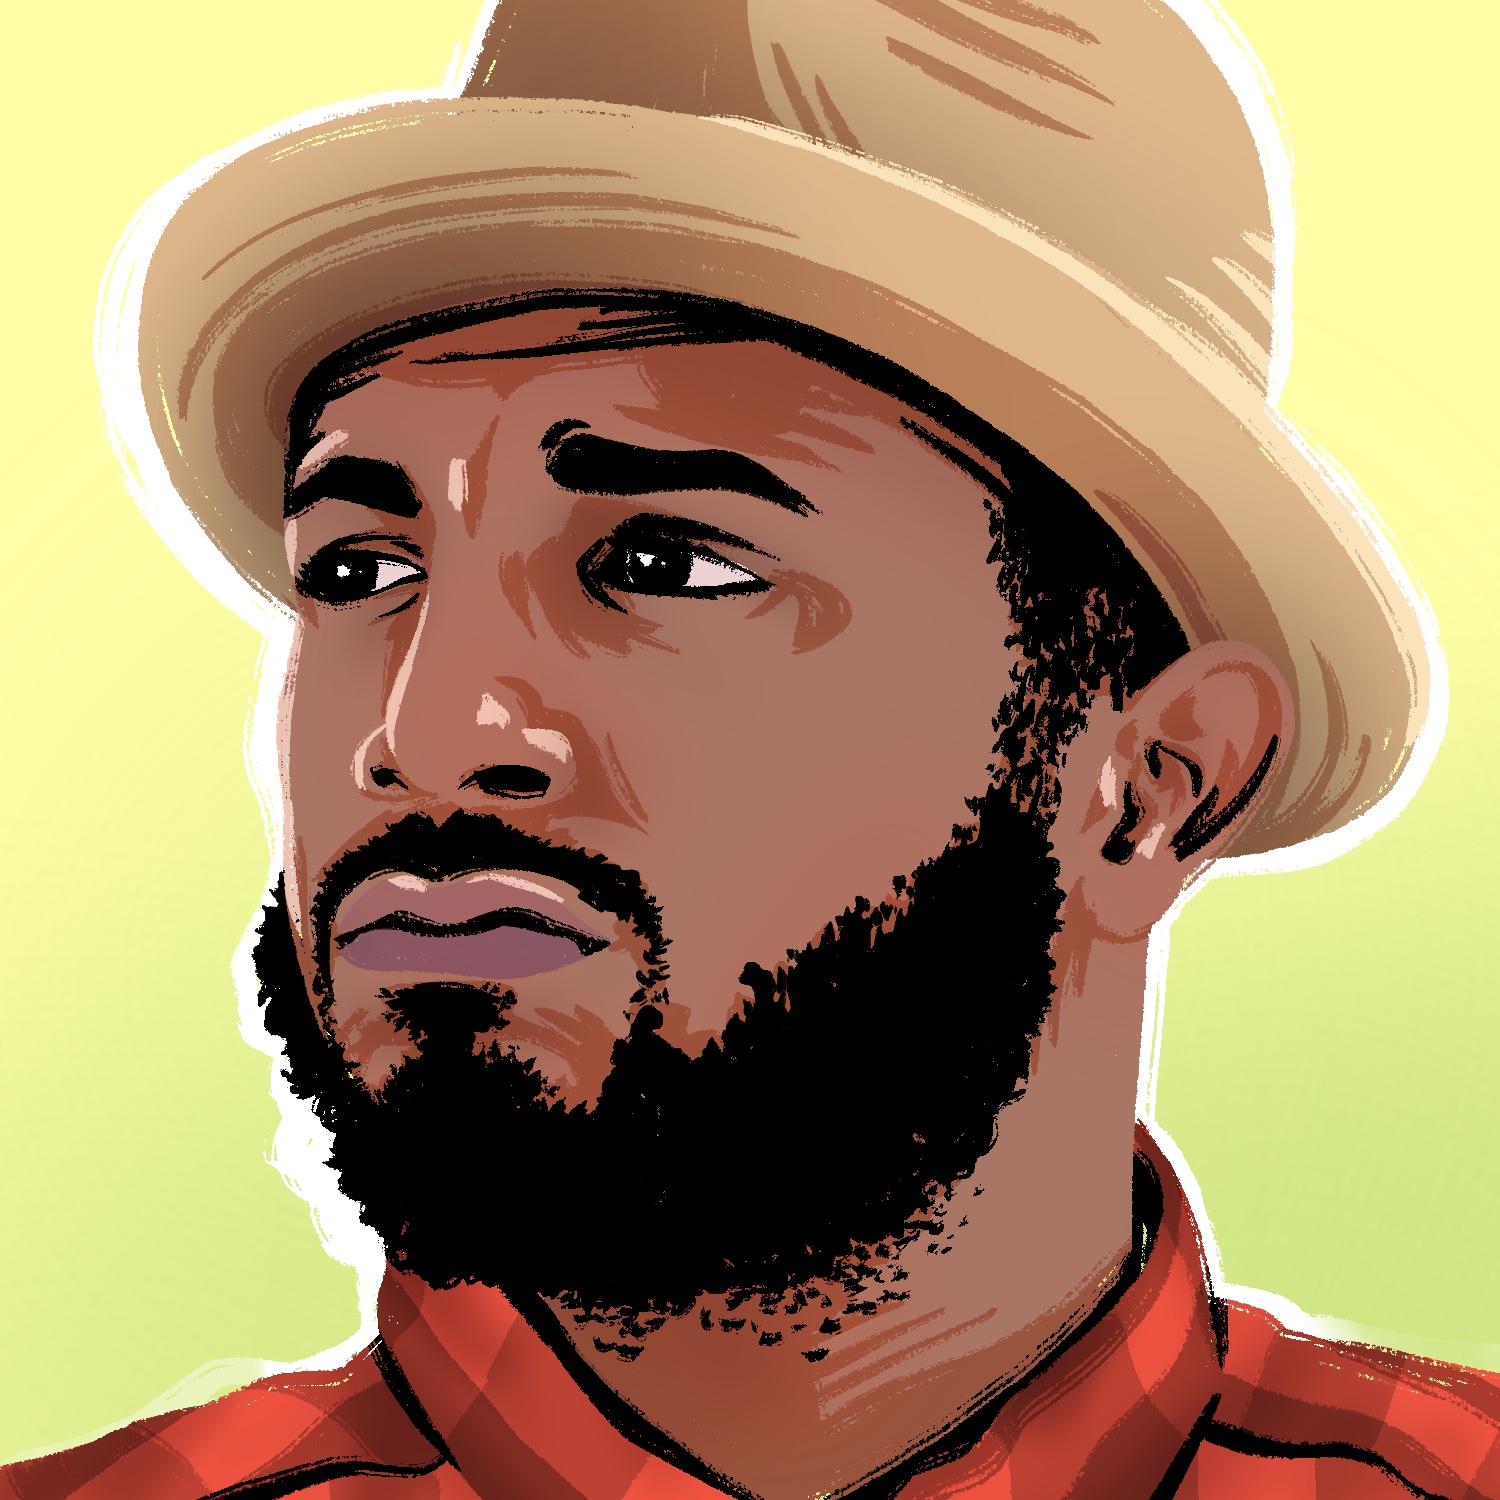 An illustration of a man wearing a red plaid shirt and a hat. The man is looking to the left, away from the viewer. He has a dark complexion, dark eyes, and black hair and beard. He has a look of mild concern. The background is a very light green that fades to yellow.